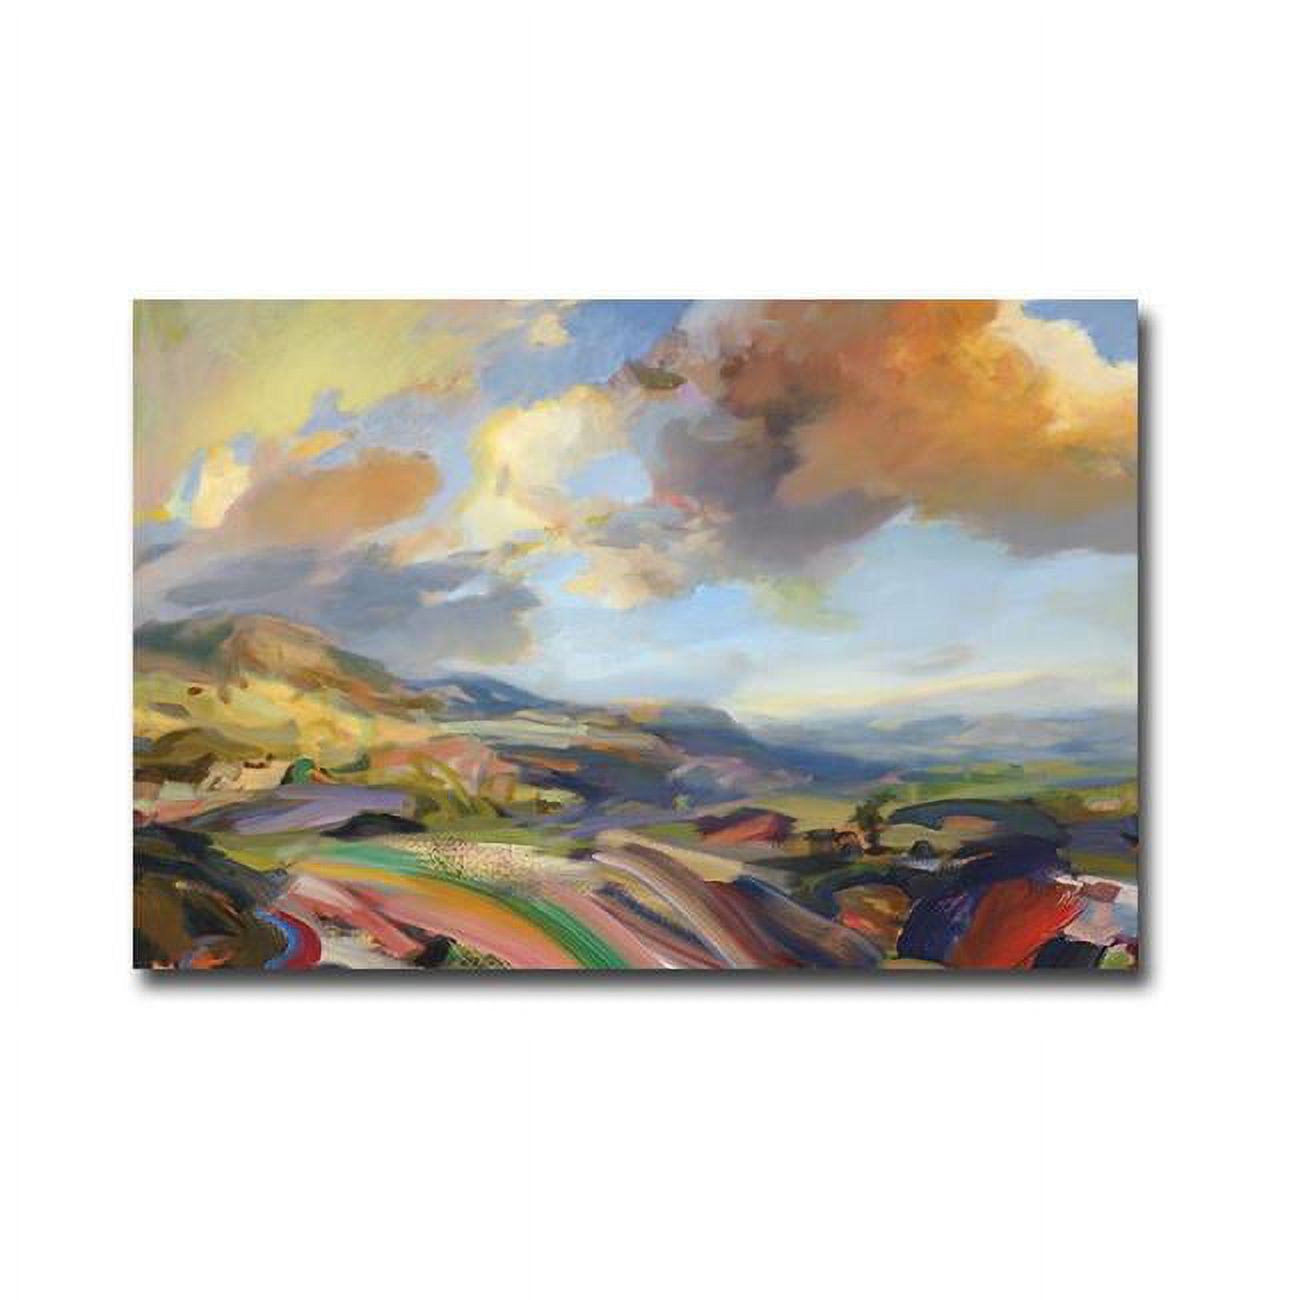 1218o469eg Never Too Proud By Jeffrey Beauchamp Premium Gallery-wrapped Canvas Giclee Art - Ready-to-hang, 12 X 18 X 1.5 In.